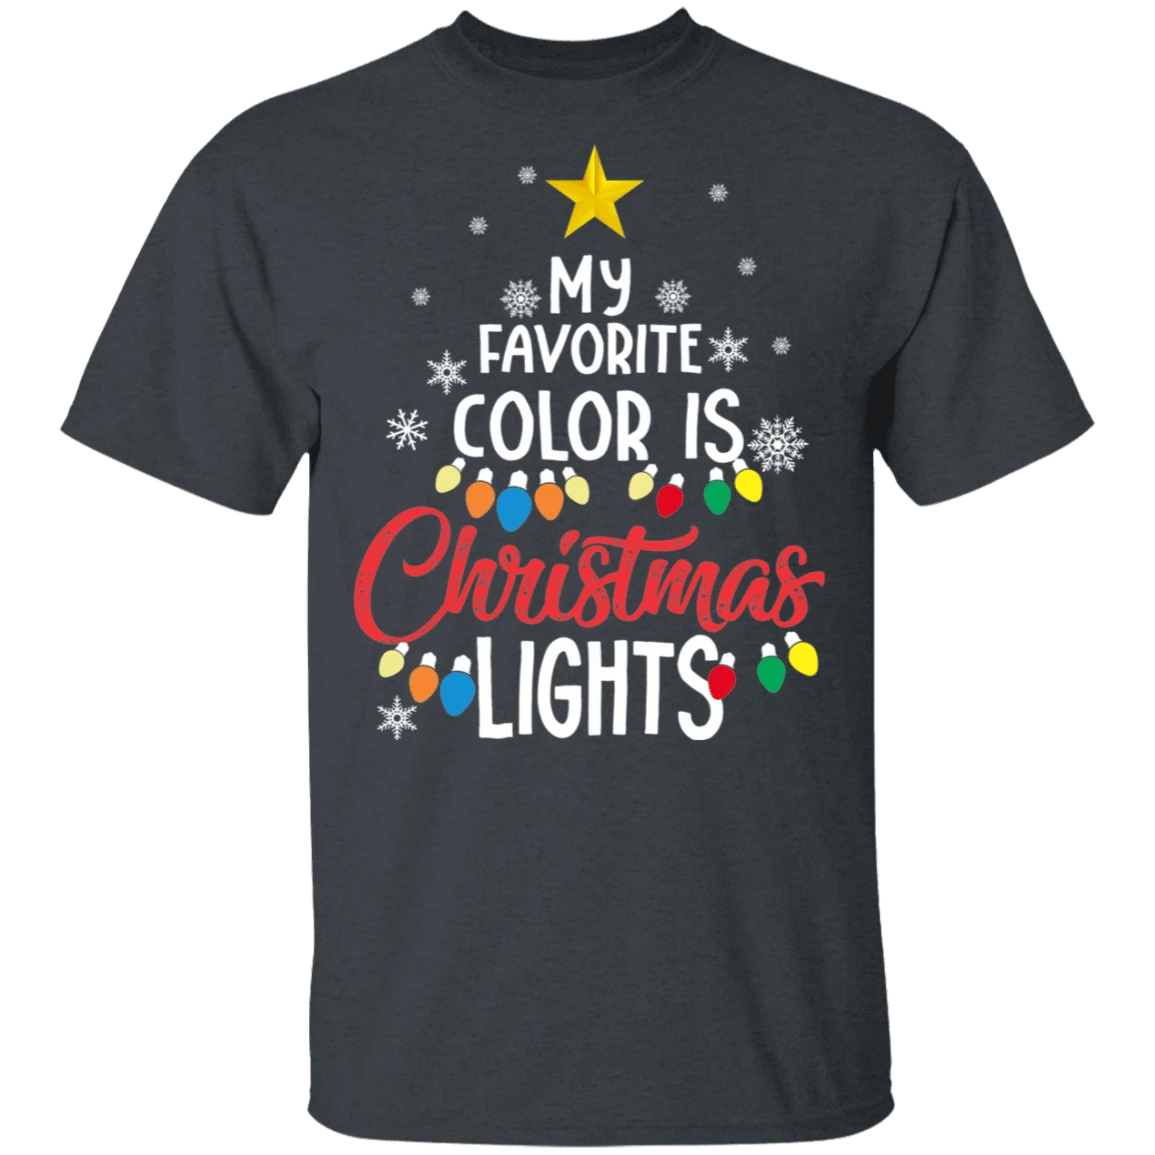 My Favorite Color Is Christmas Light T-Shirt Style: Unisex T-shirt, Color: Dark Heather